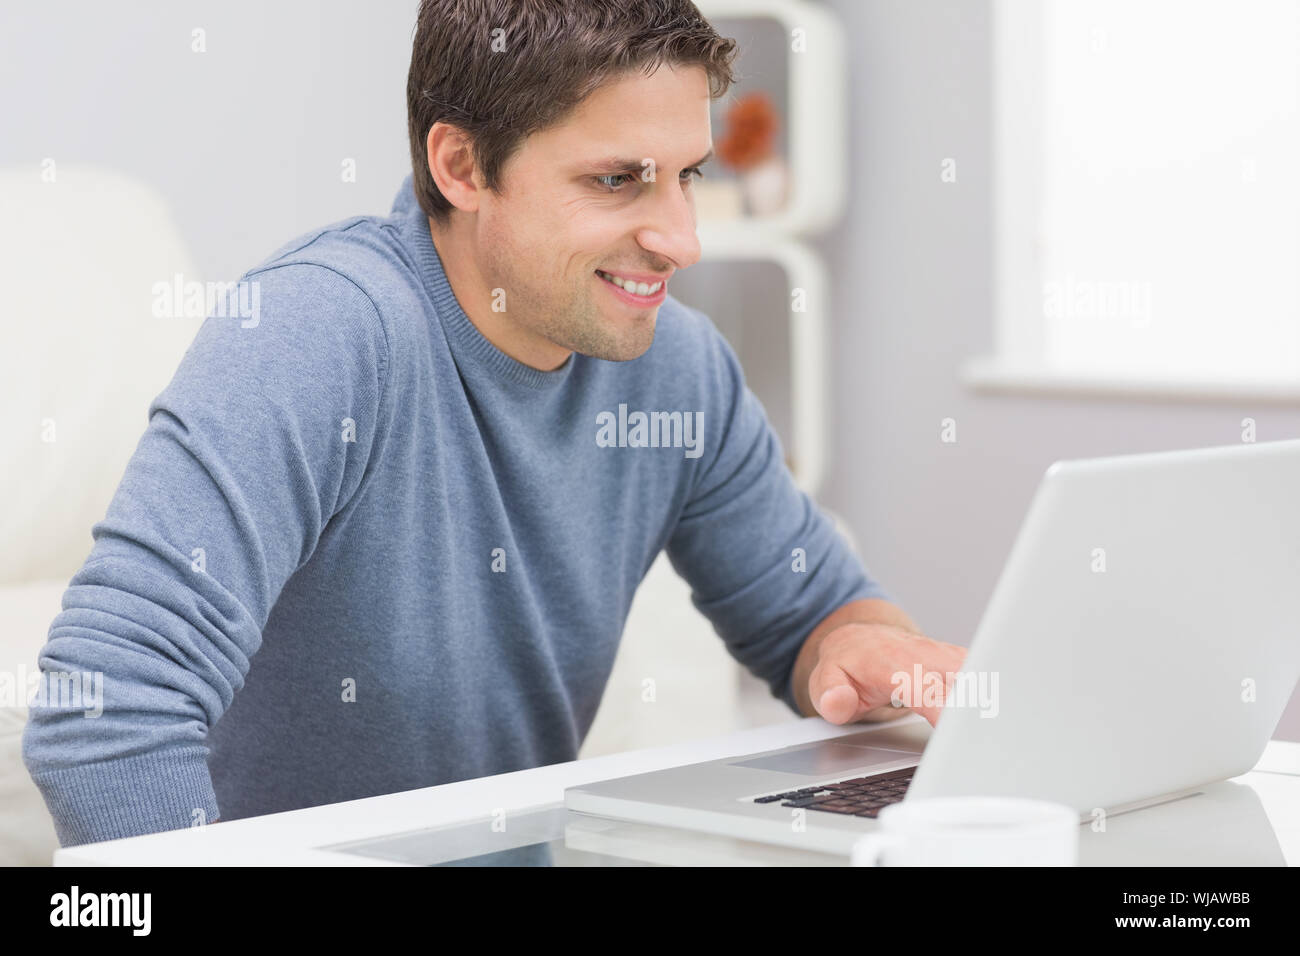 Smiling young man using laptop in living room Stock Photo